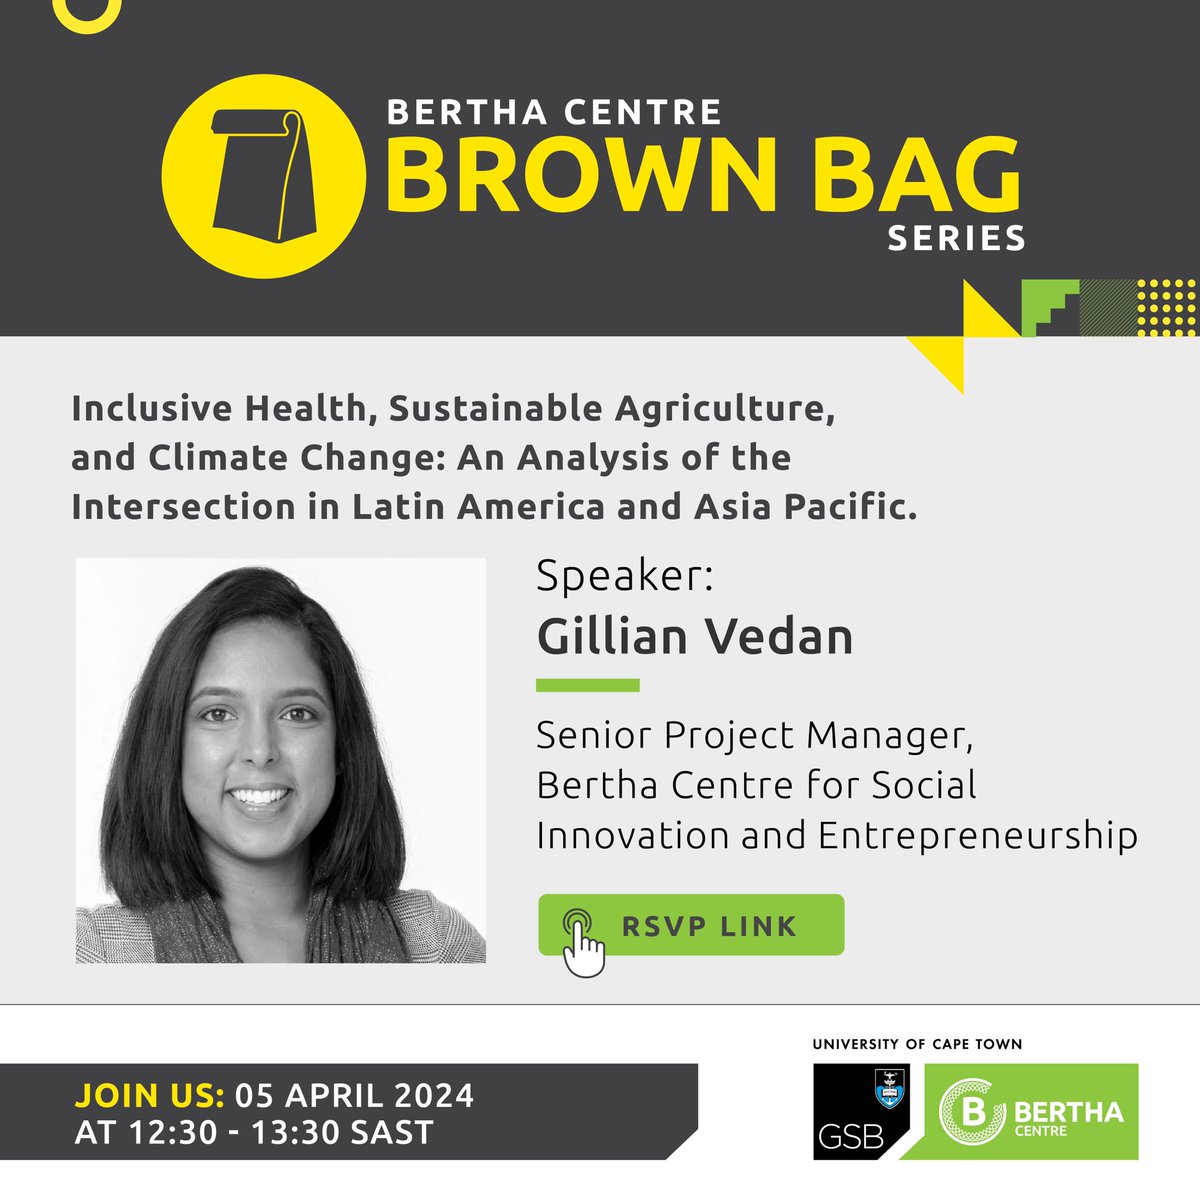 Join us on 05 April at 12:30 for Part 10 of our Brown Bag Series on 'Inclusive Health, Sustainable Agriculture, and Climate Change: An analysis of the intersection in Latin America and Asia Pacific' For more info RSVP here: bit.ly/3vgDITm